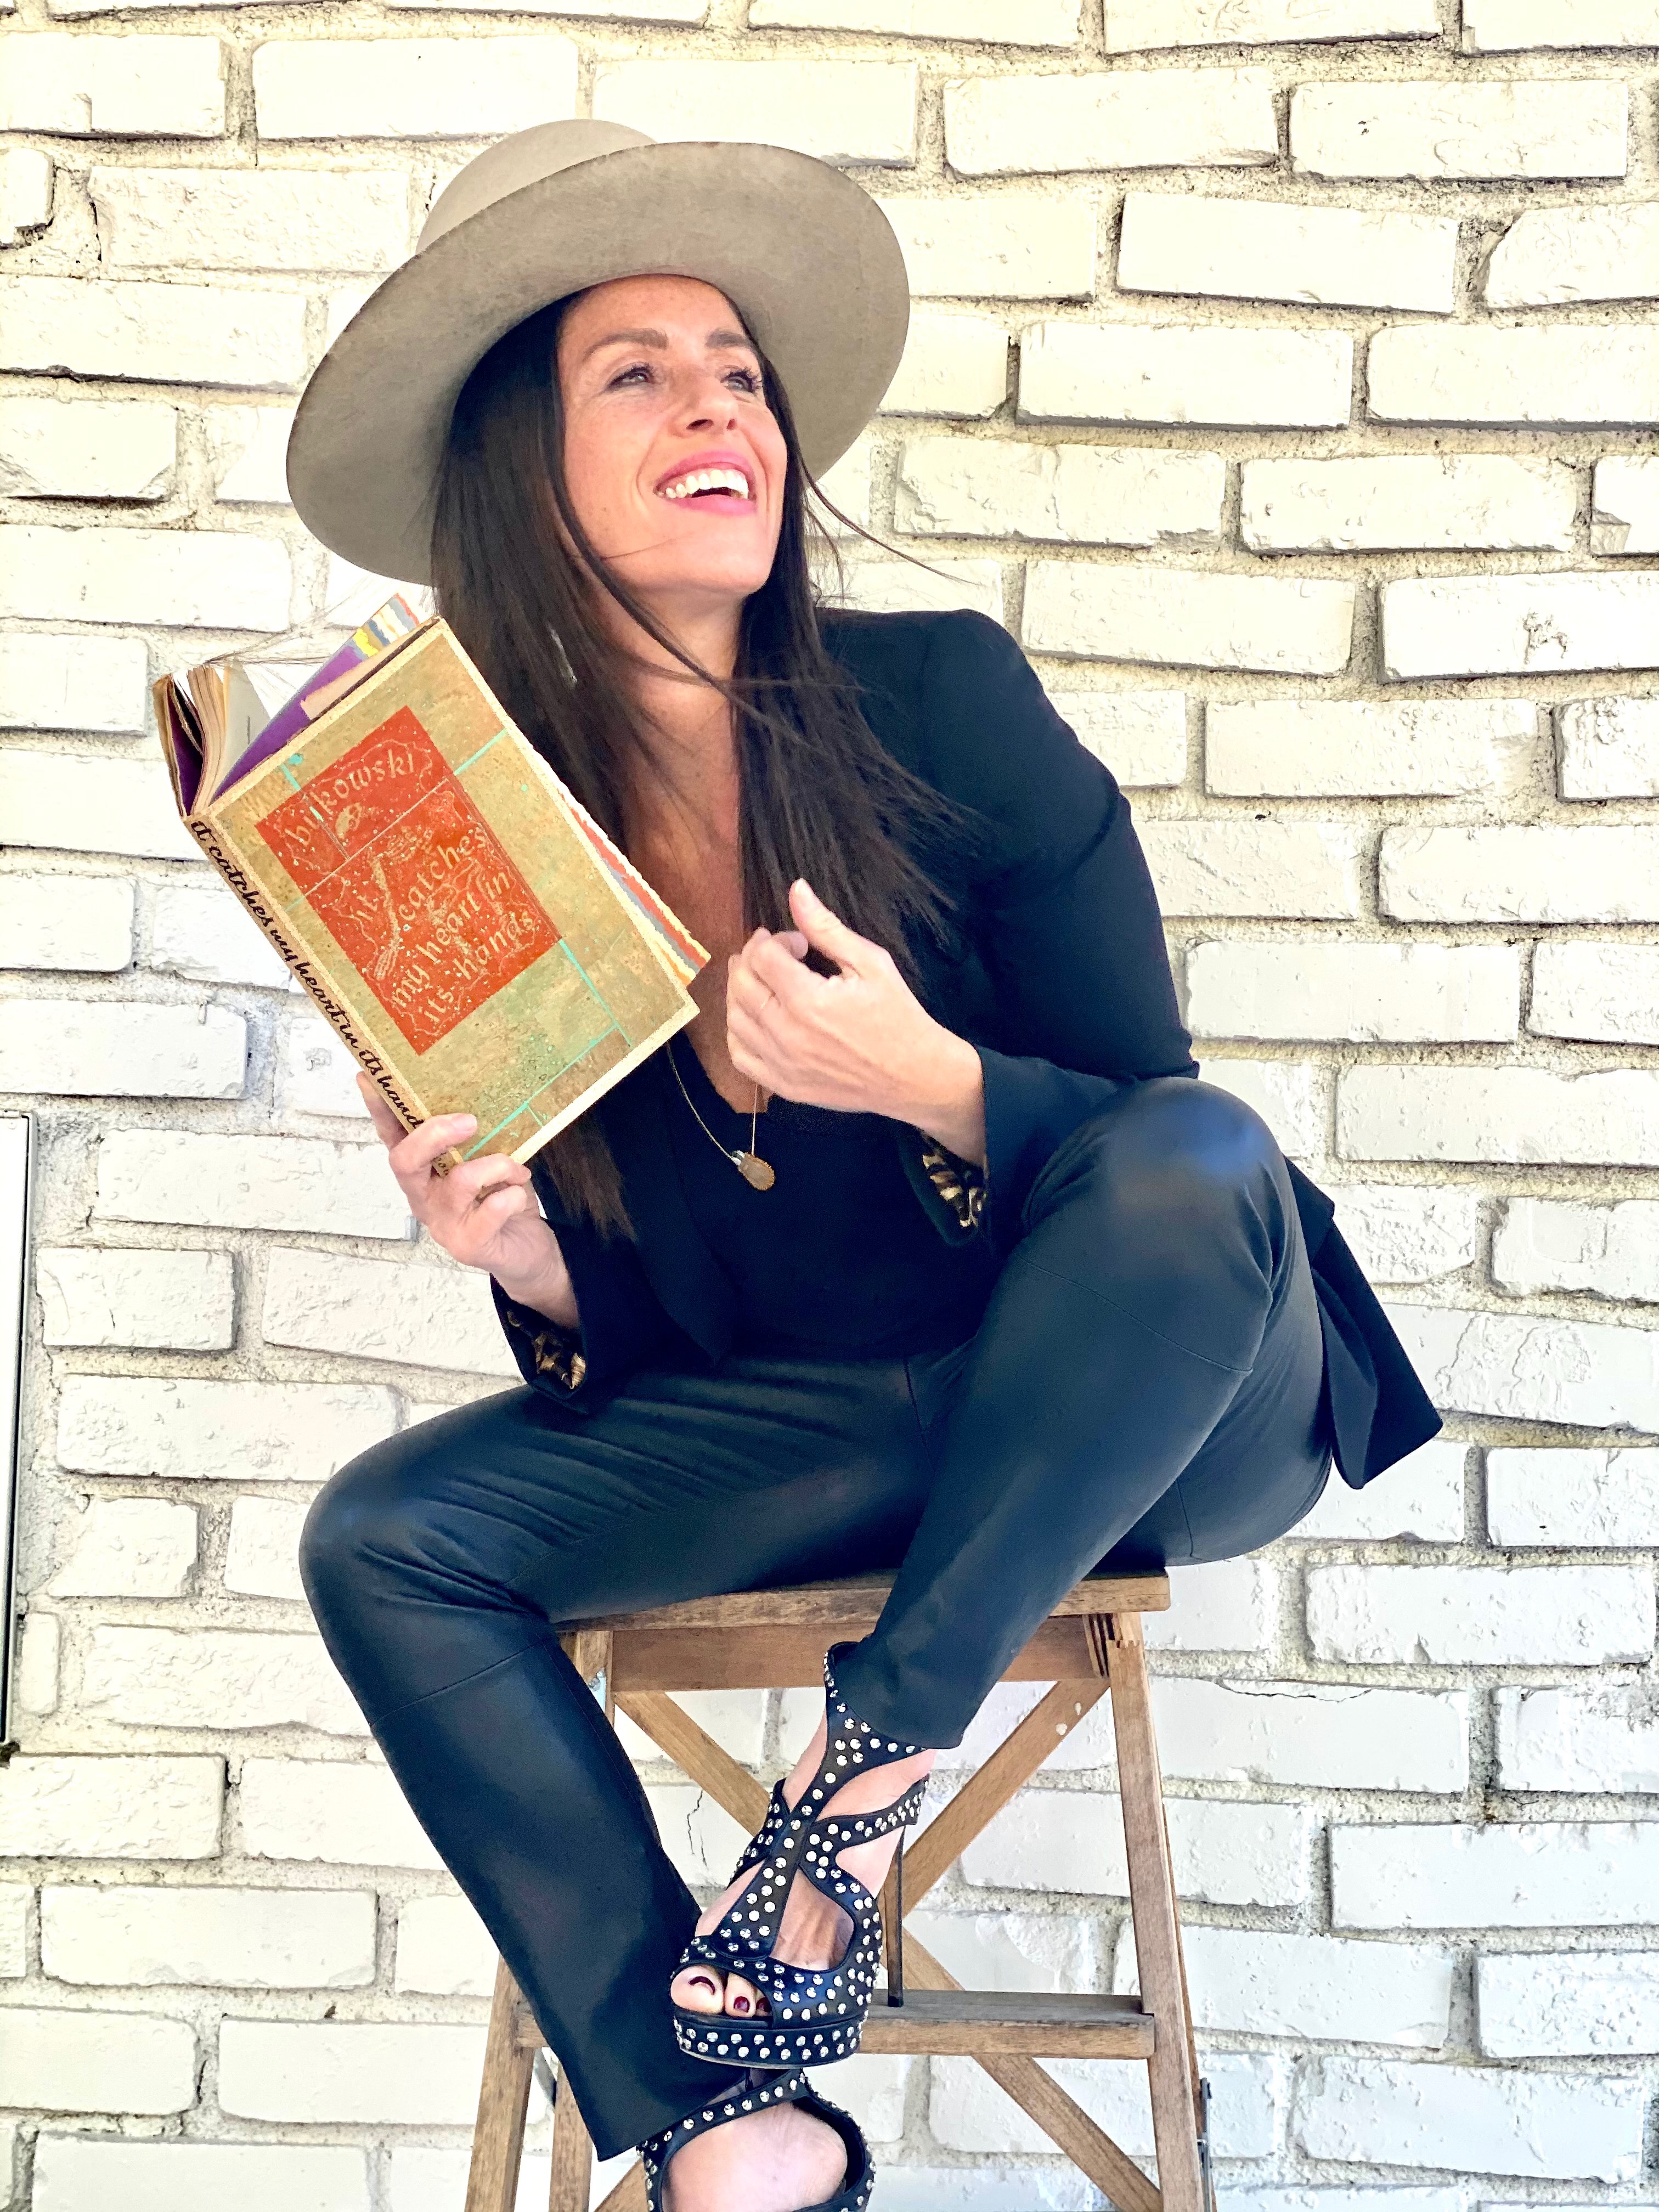 GSK MenB campaign fall 2021 with Soleil Moon Frye